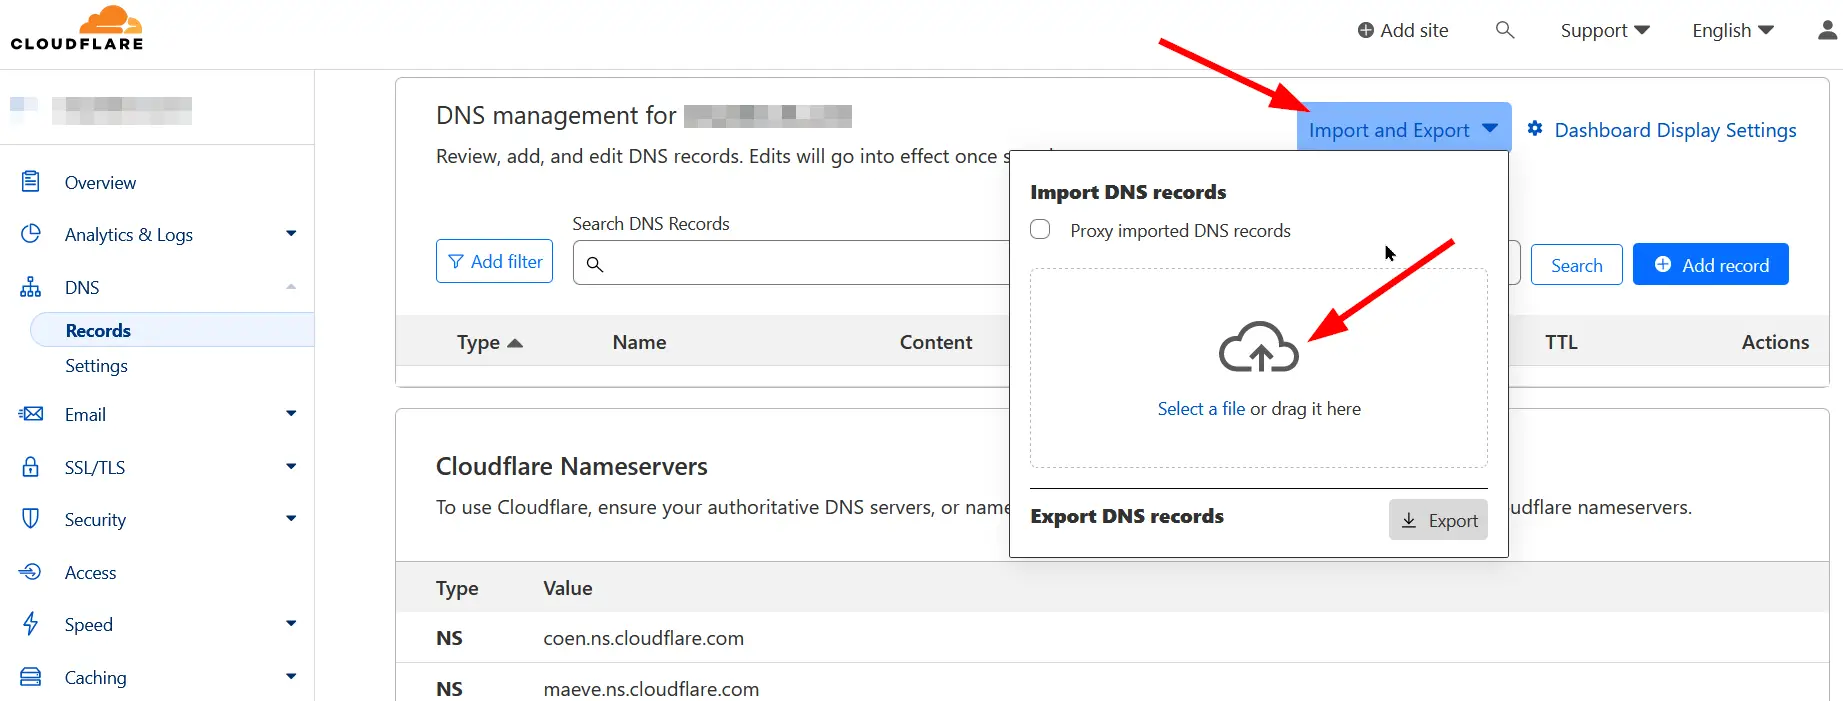 How to Transfer Domain from One Cloudflare Account to Another Account?